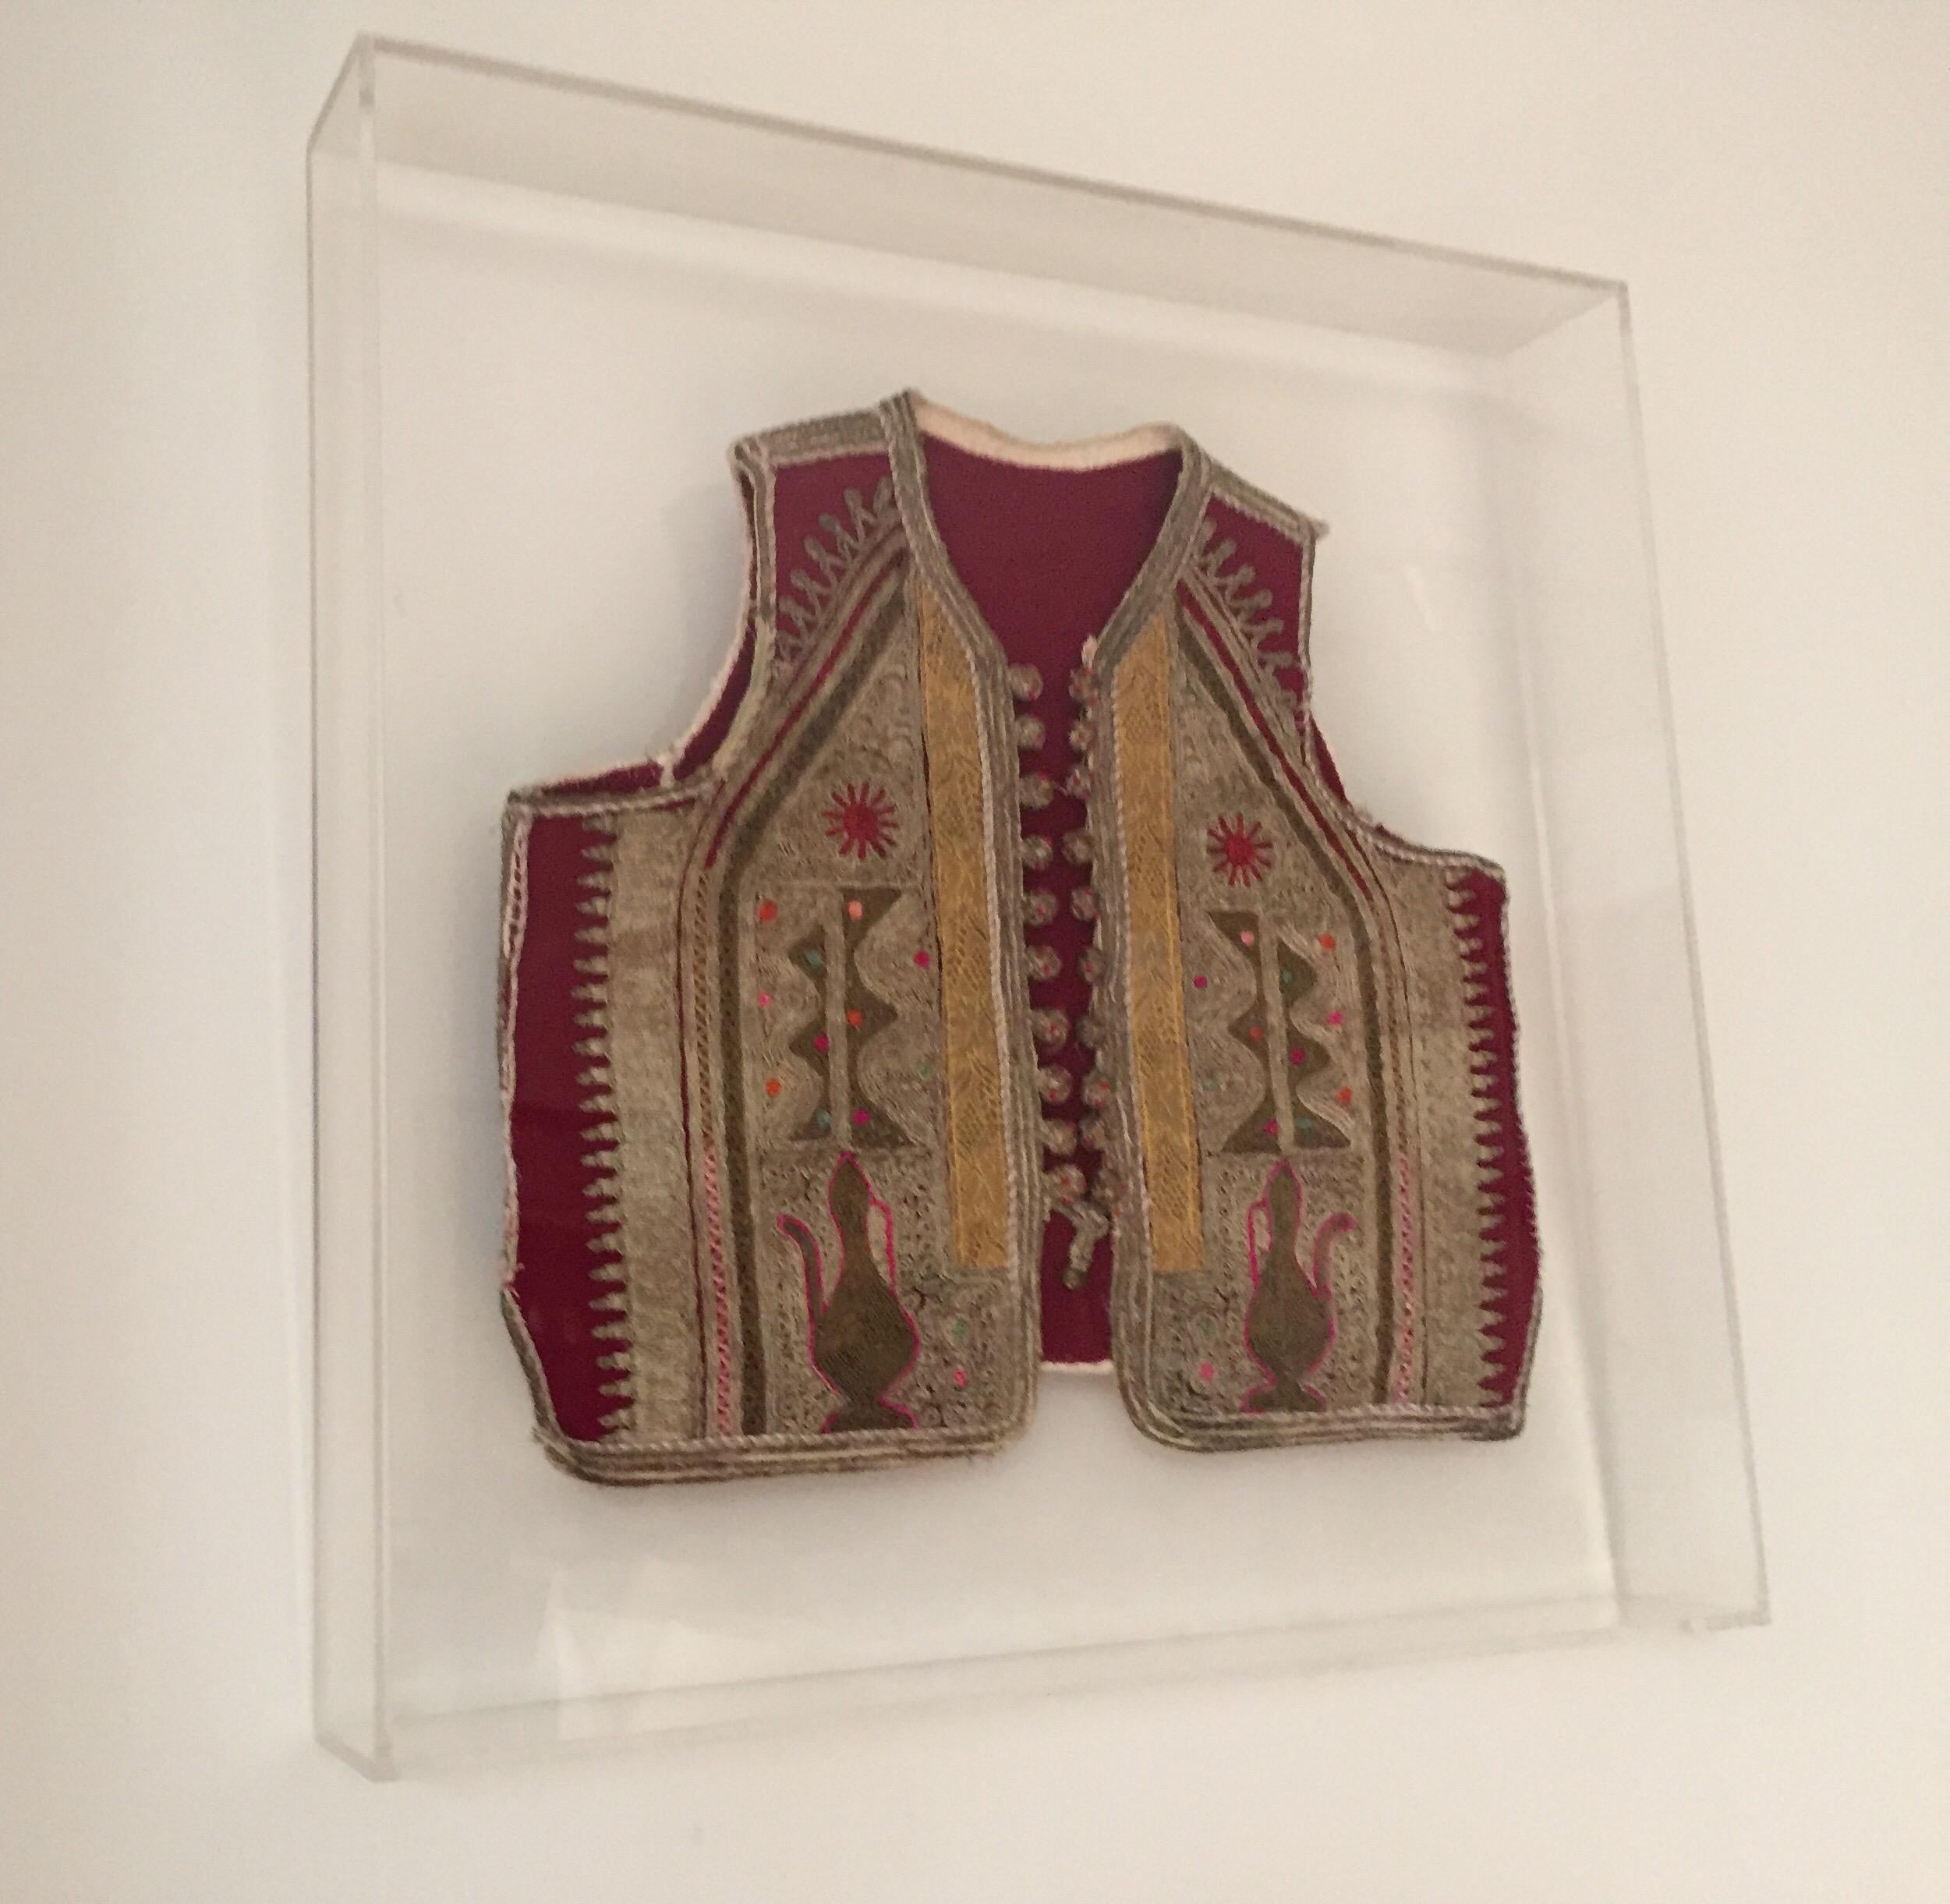 19th Century Antique Ottoman Embroidered Vest Framed in a Lucite Box 4